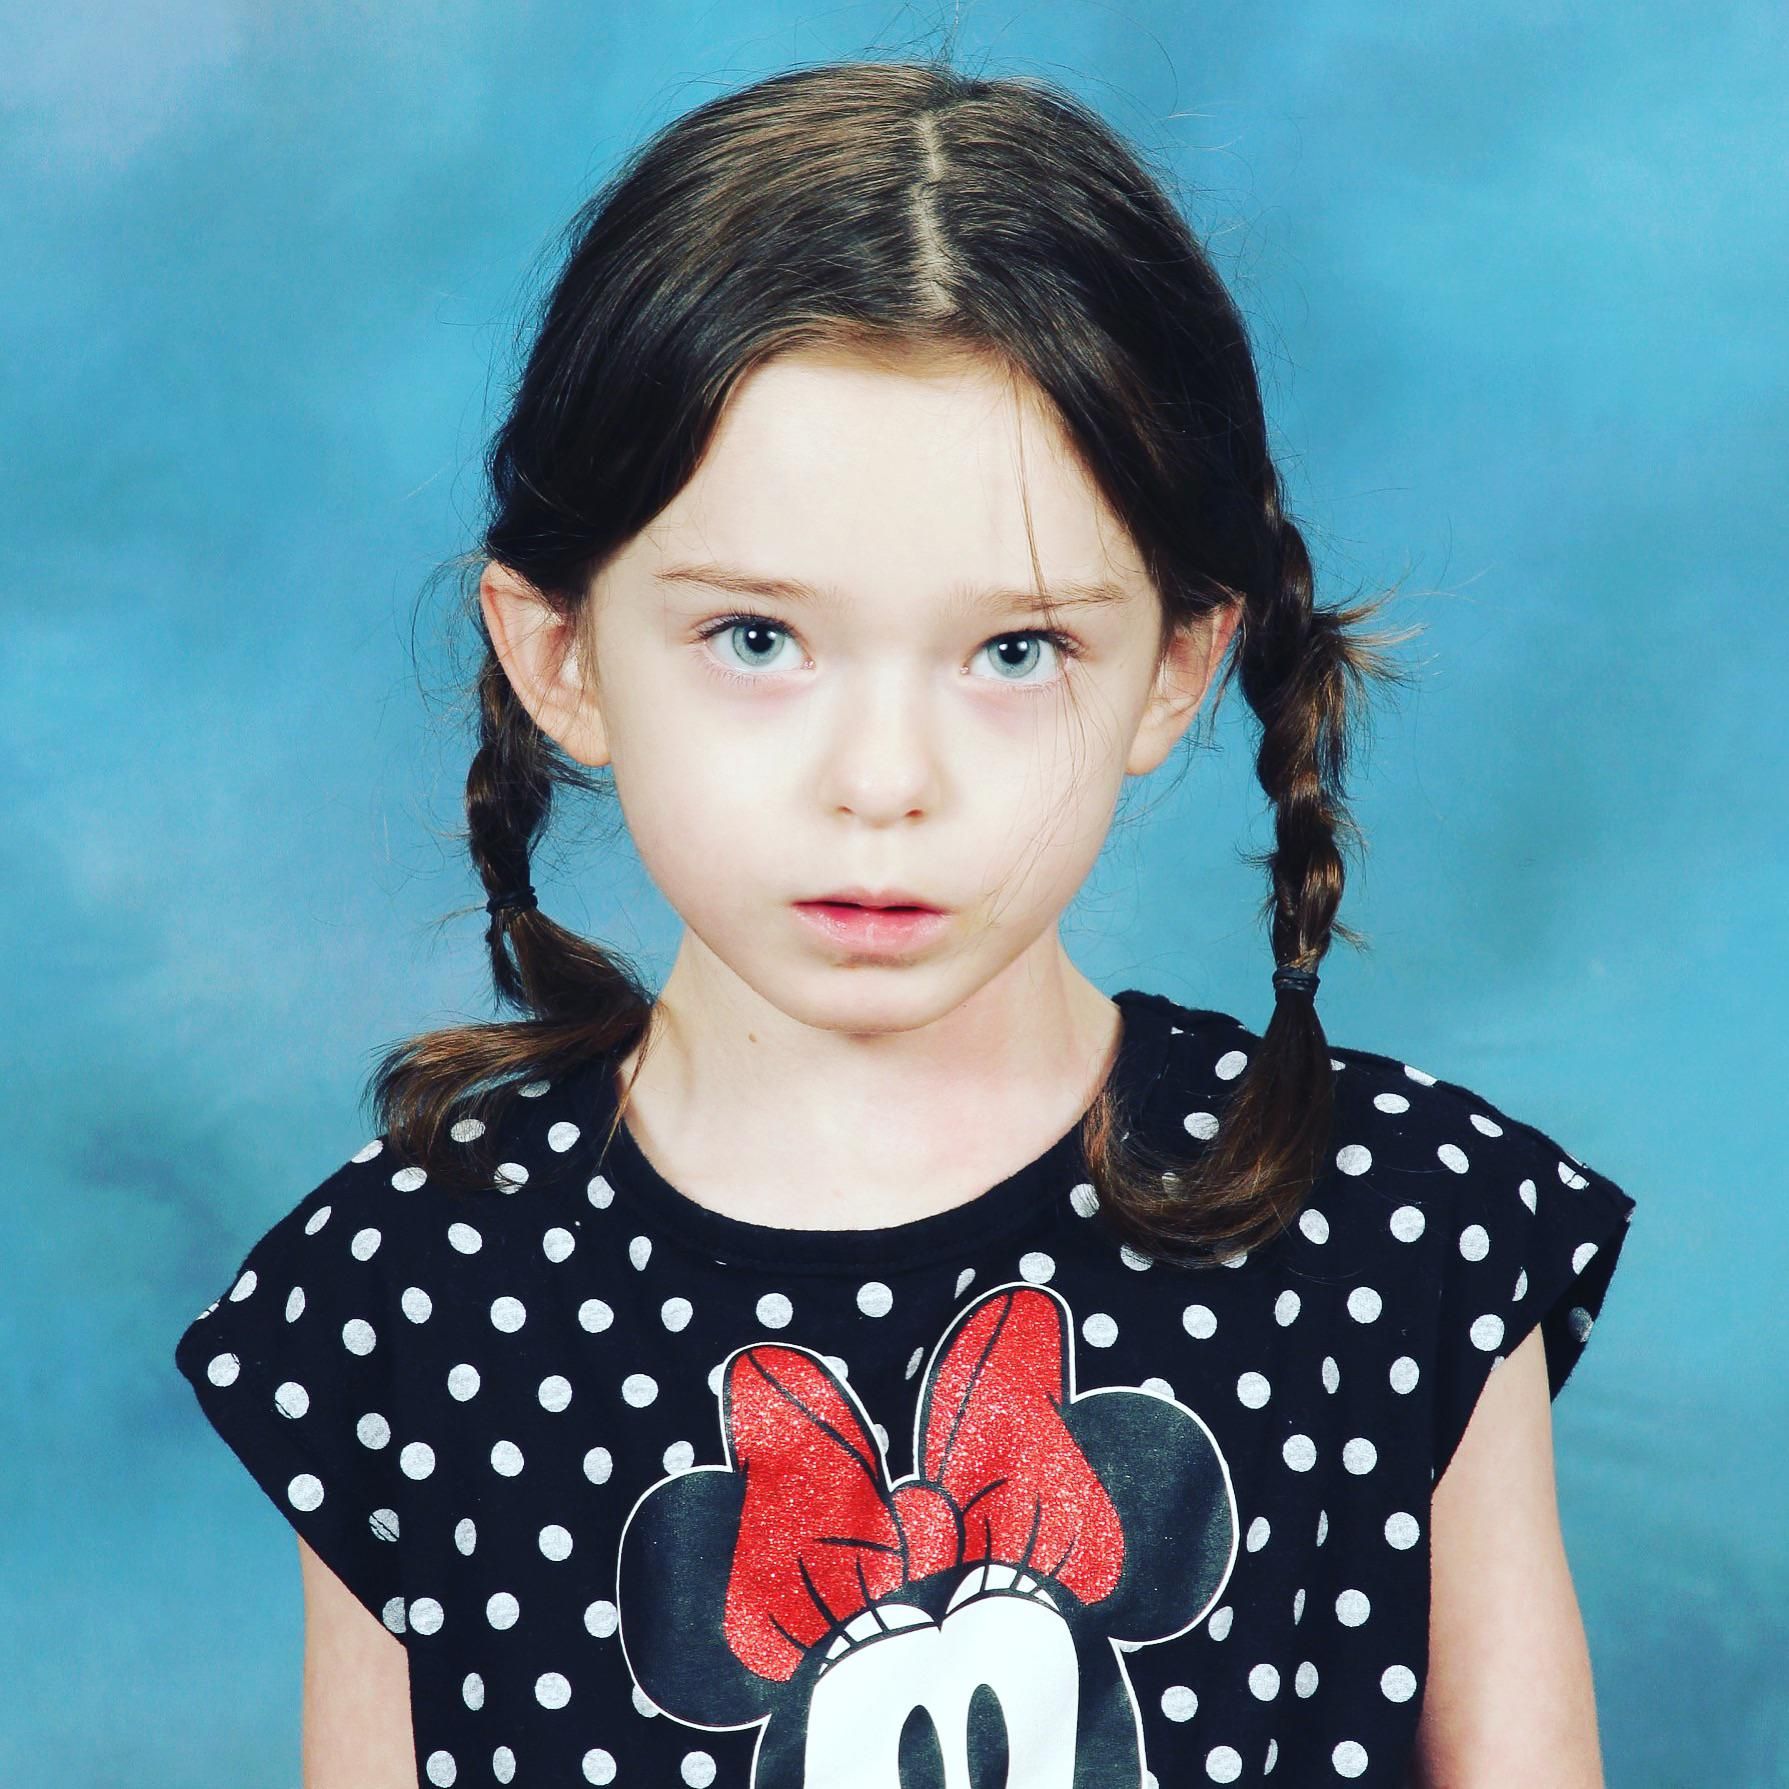 My daughter’s school picture. She’s a bit too obsessed with Wednesday Addams.